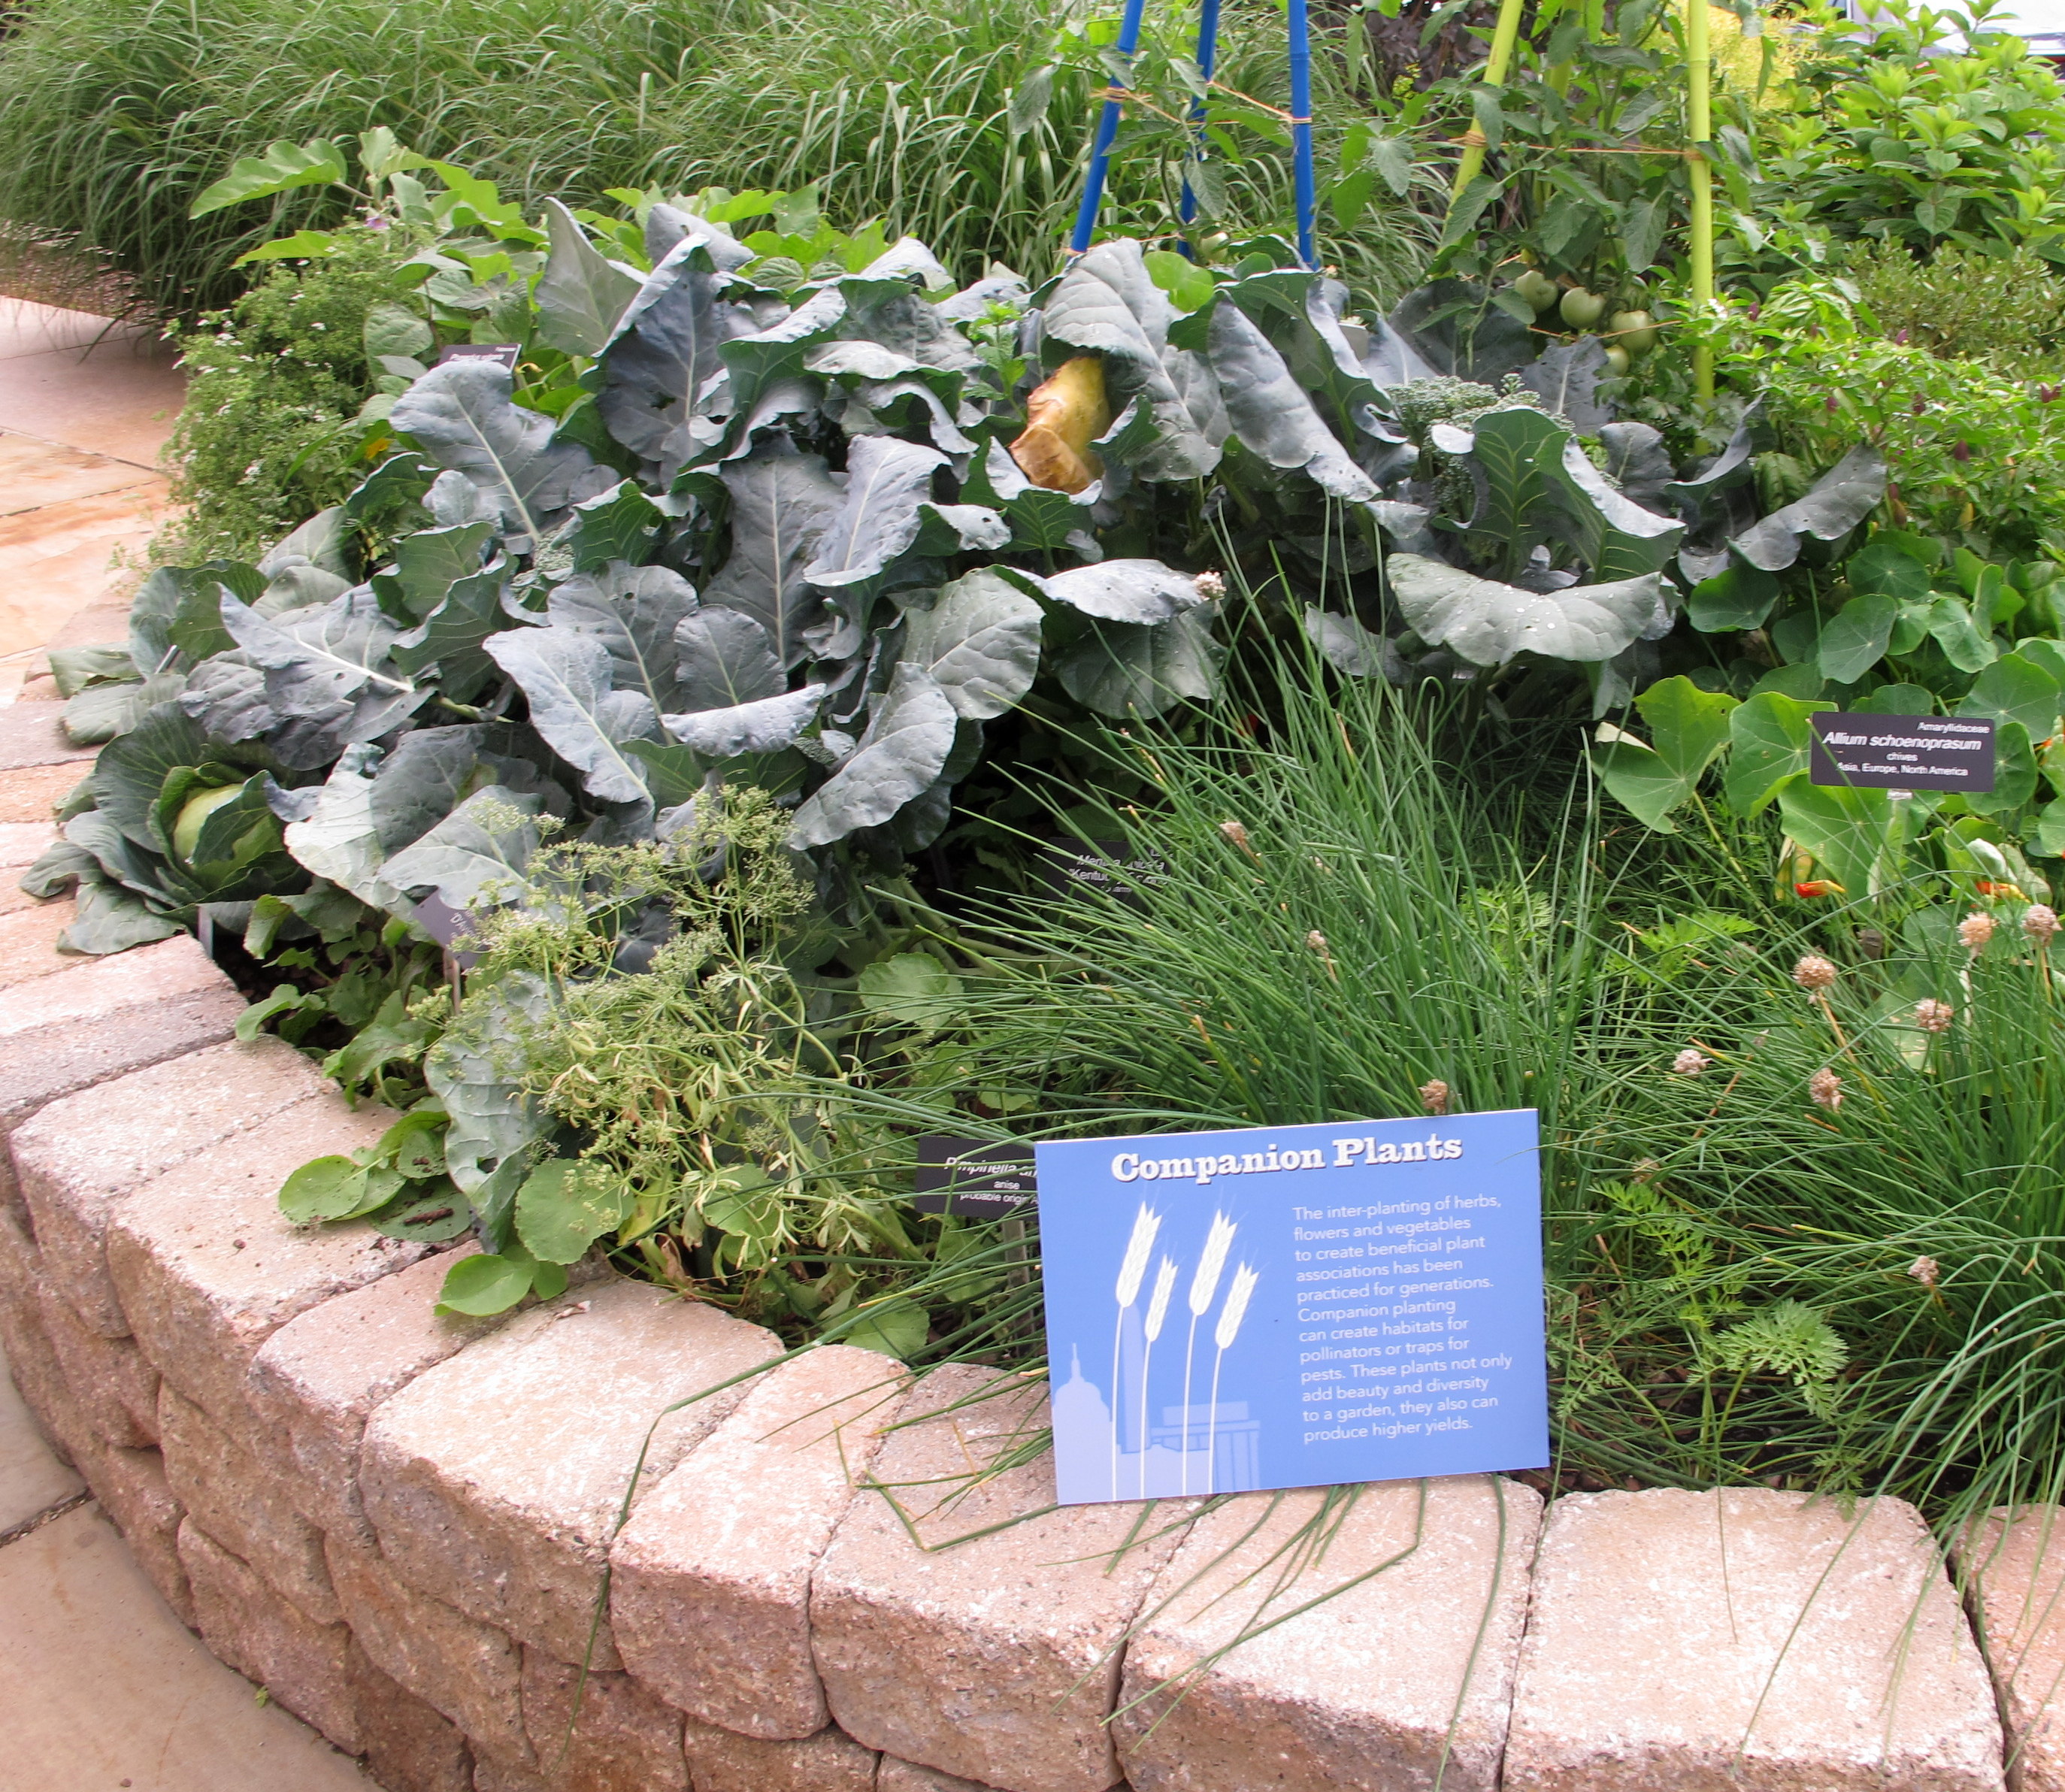 A diverse planting of veggies and herbs